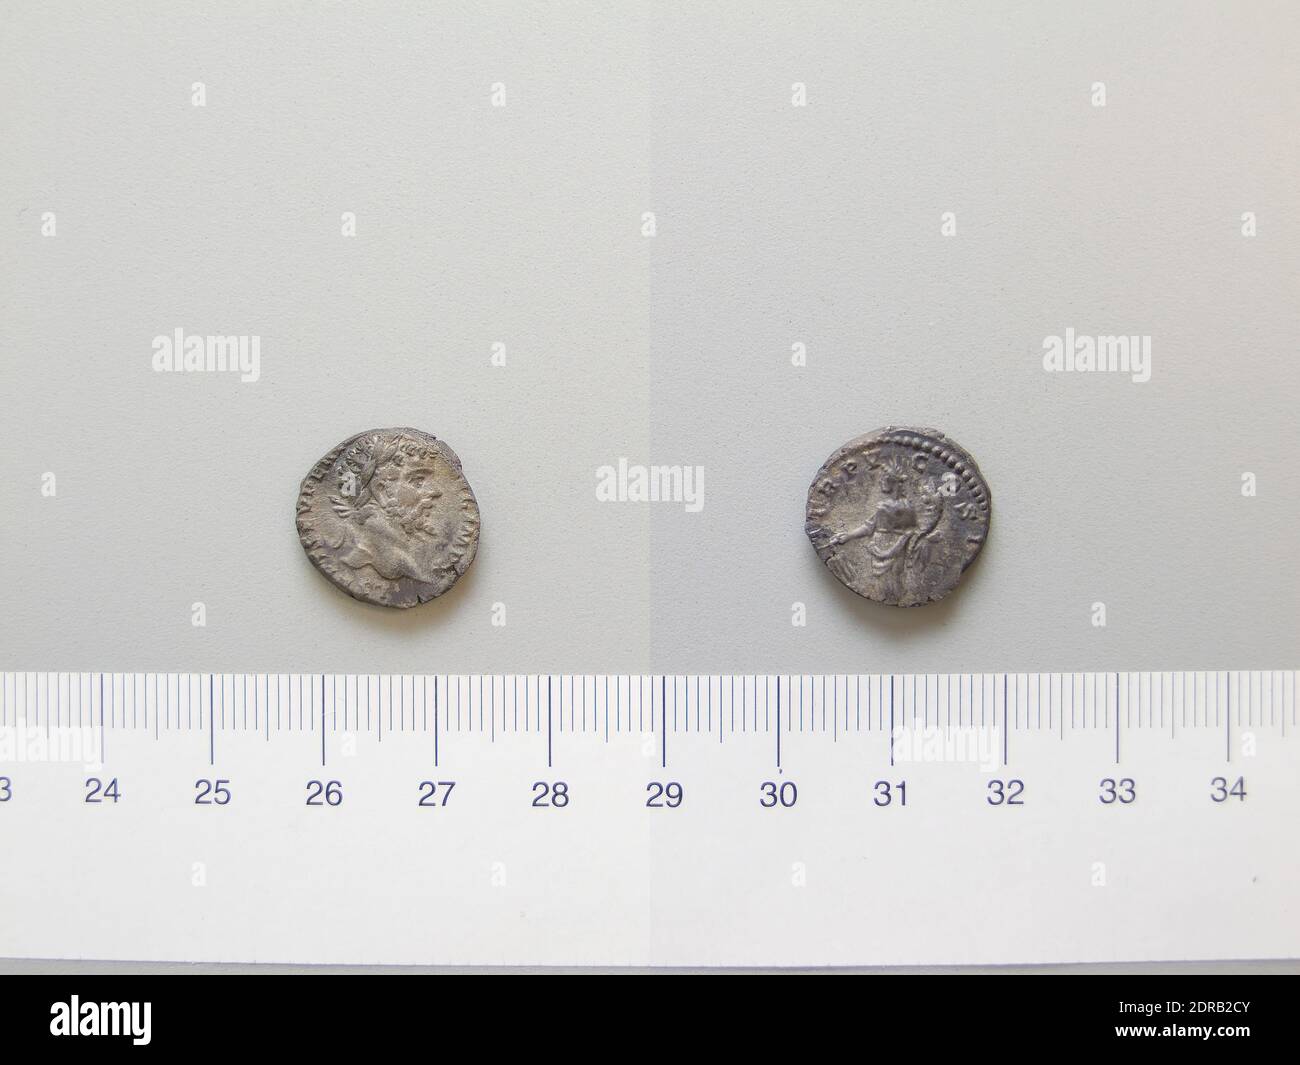 Ruler: Septimius Severus, Emperor of Rome, A.D. 146–211, ruled 193–211, Mint: Rome, Denarius of Septimius Severus, Emperor of Rome from Rome, 197–98, Silver, 0.66 g, 12:00, 16.5 mm, Made in Rome, Italy, Roman, 2nd century A.D., Numismatics Stock Photo